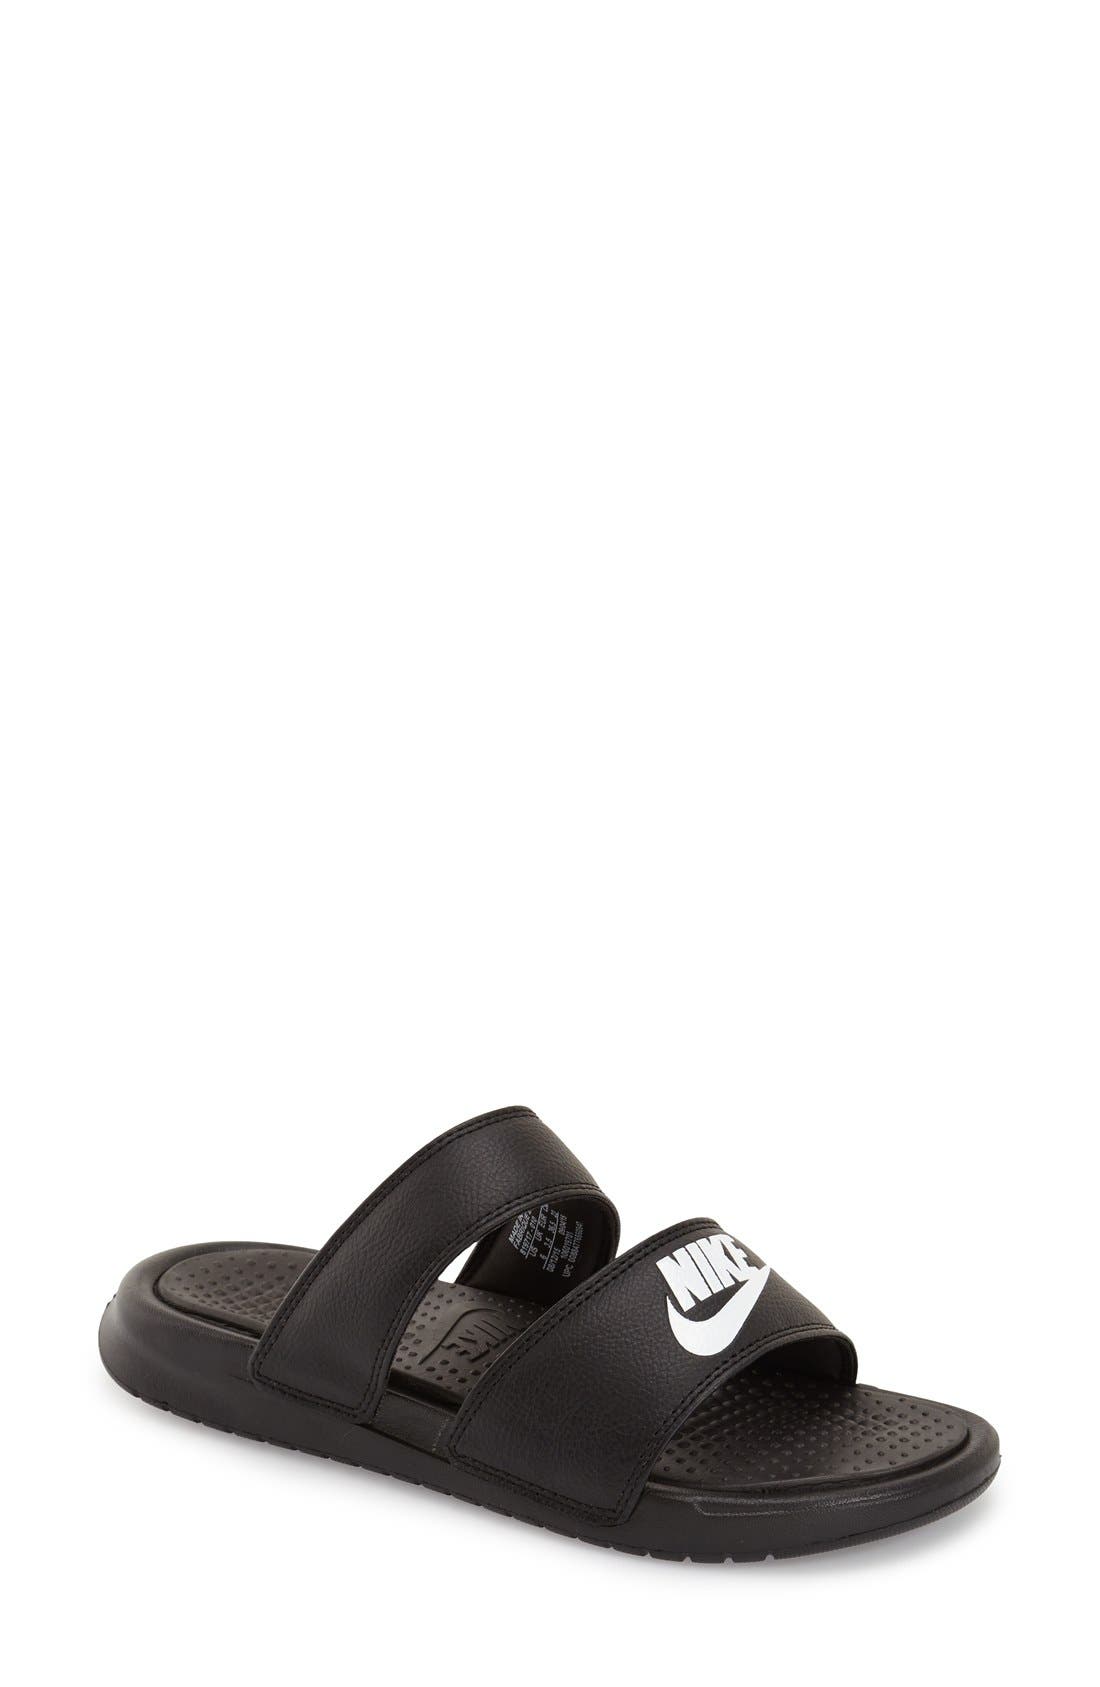 double strapped nike slides